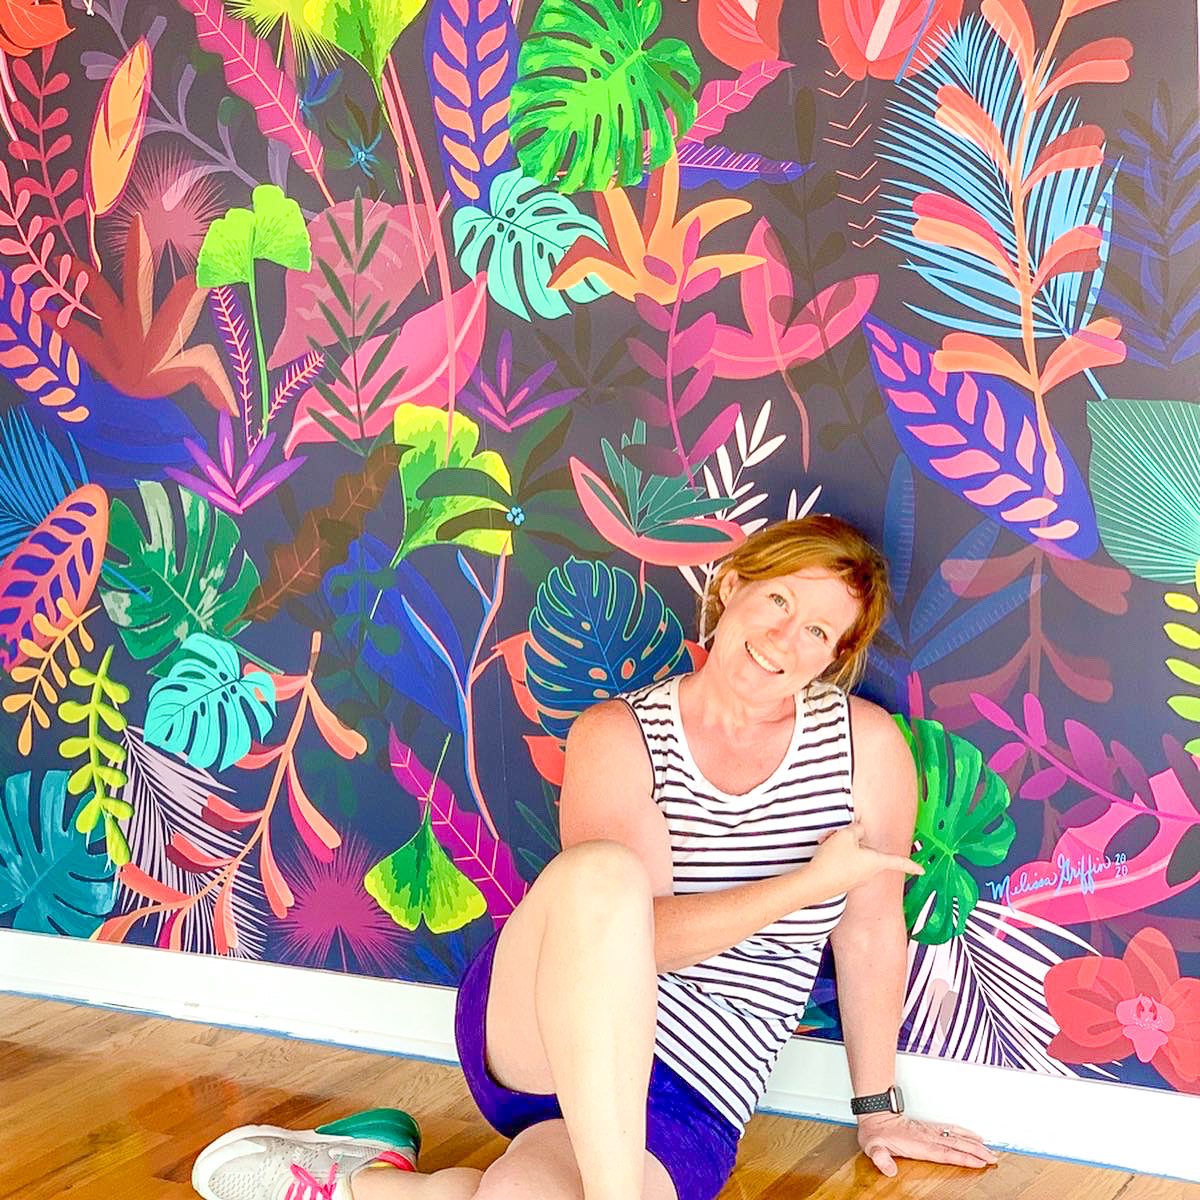 woman in striped shirt and blue shorts sitting by colorful living room wall mural